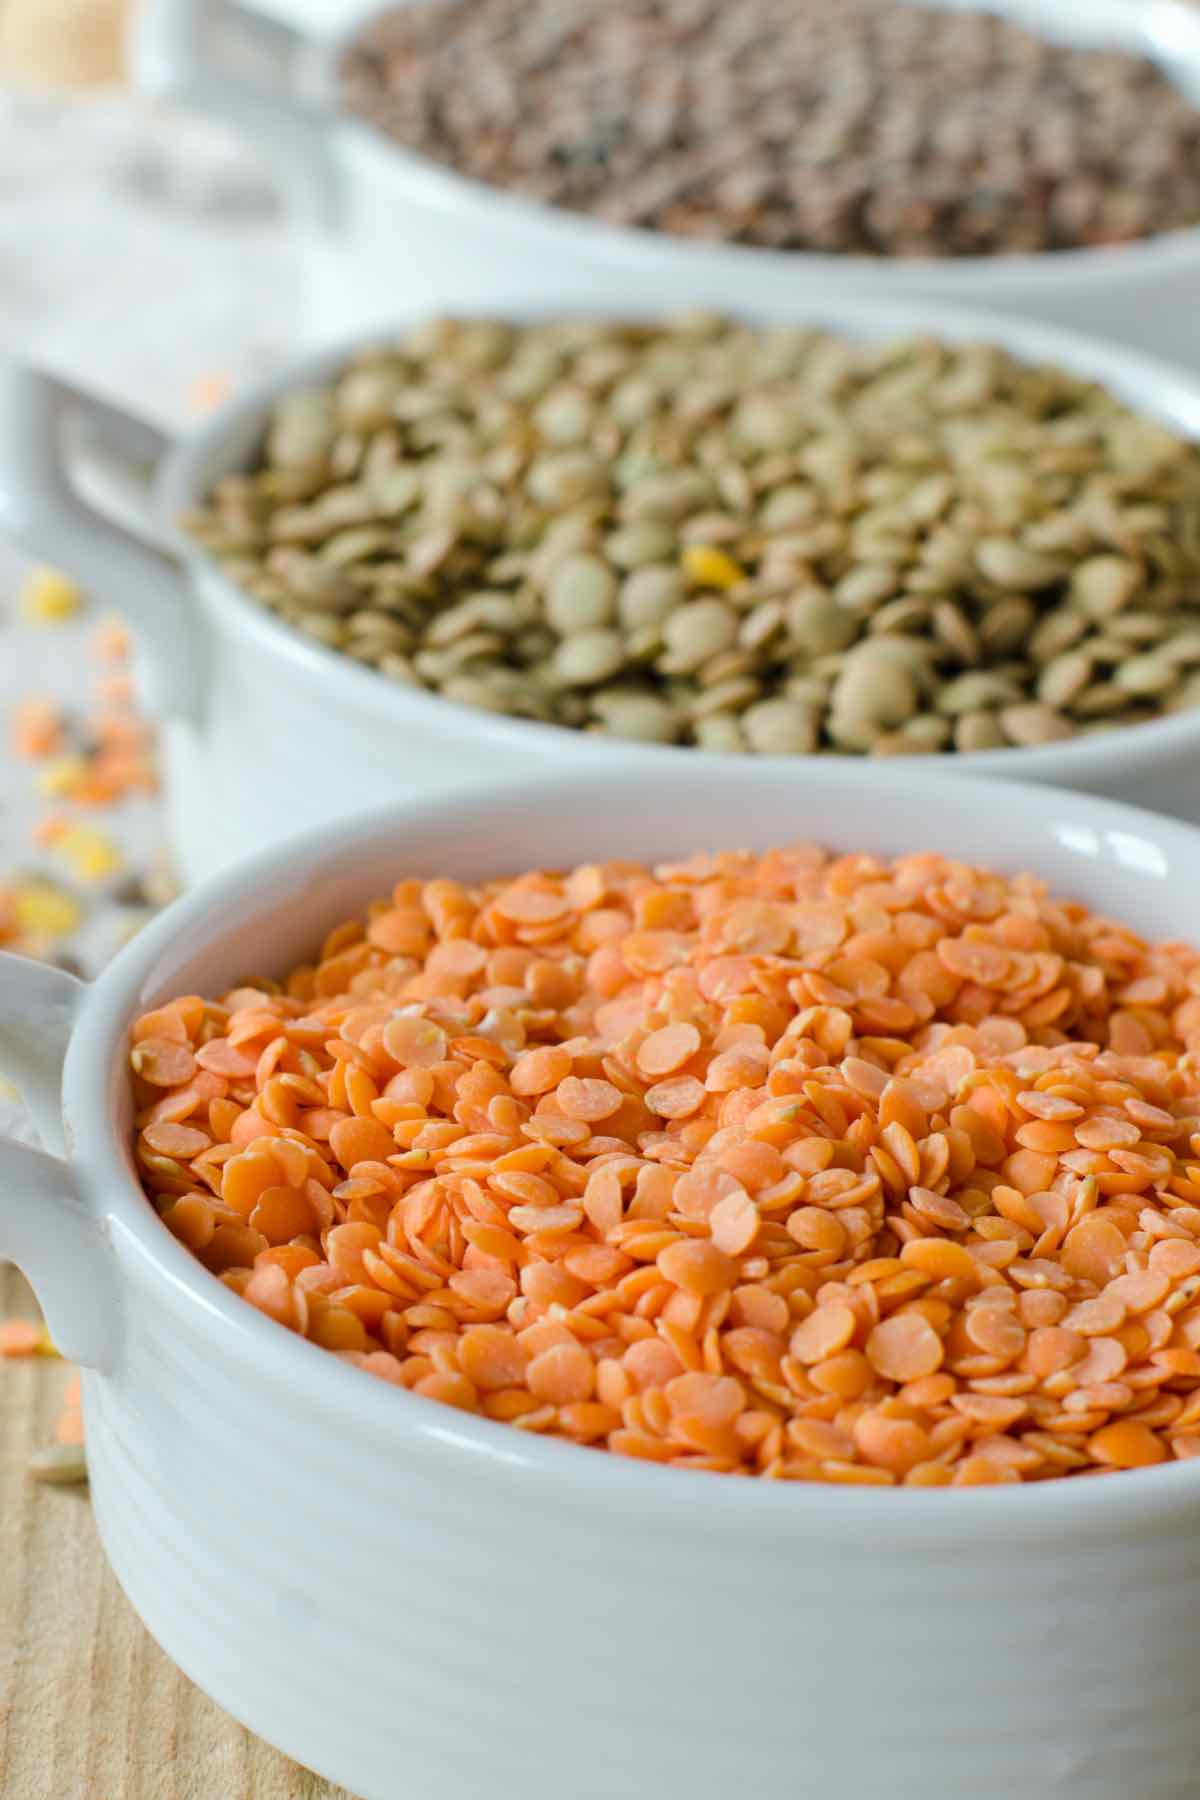 Lentils are a versatile, plant-based ingredient that is a staple ingredient in Indian cuisine. They’re high in protein, making them an excellent substitute for meat. These legumes are also packed with vitamins, minerals and fiber. Besides being nutritious, they can be used in a variety of delicious ways. We’ve rounded up 22 Best Lentil Recipes from stews to soups, salads, and even burgers.